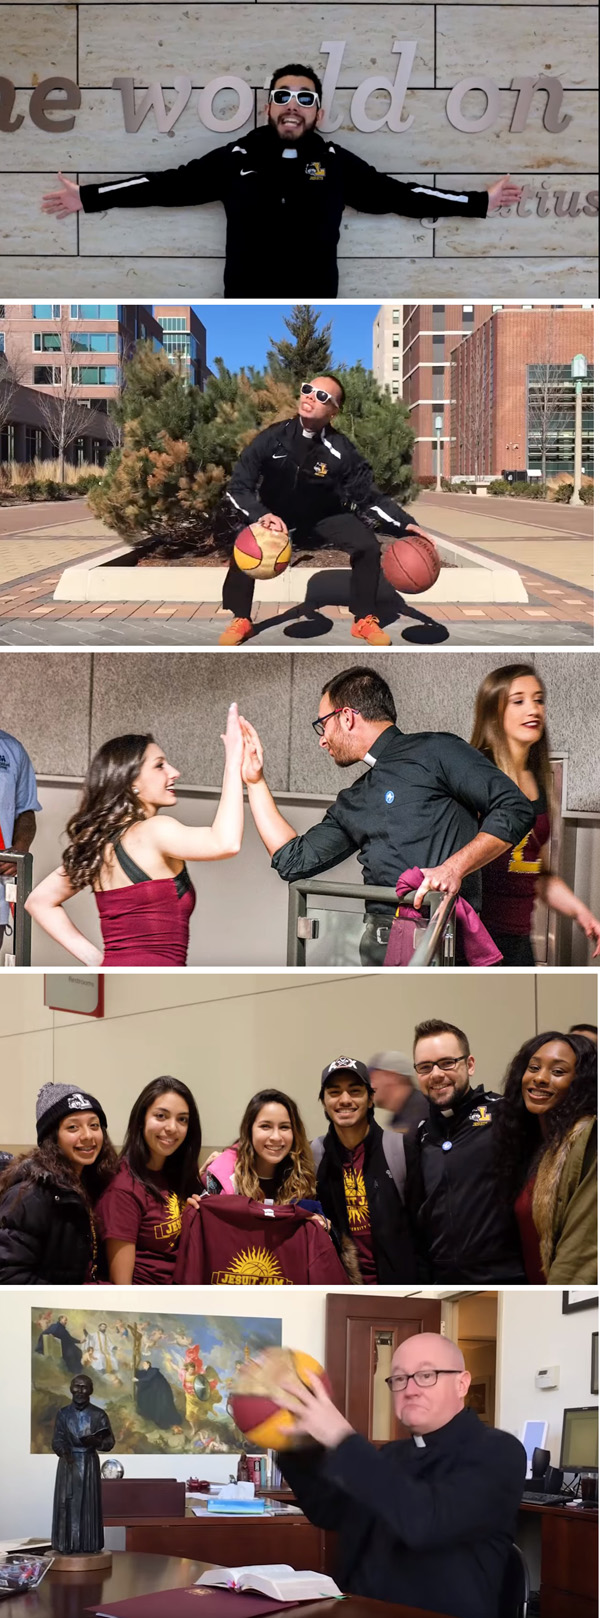 Jesuit priests doing modern dance and playing with basketballs